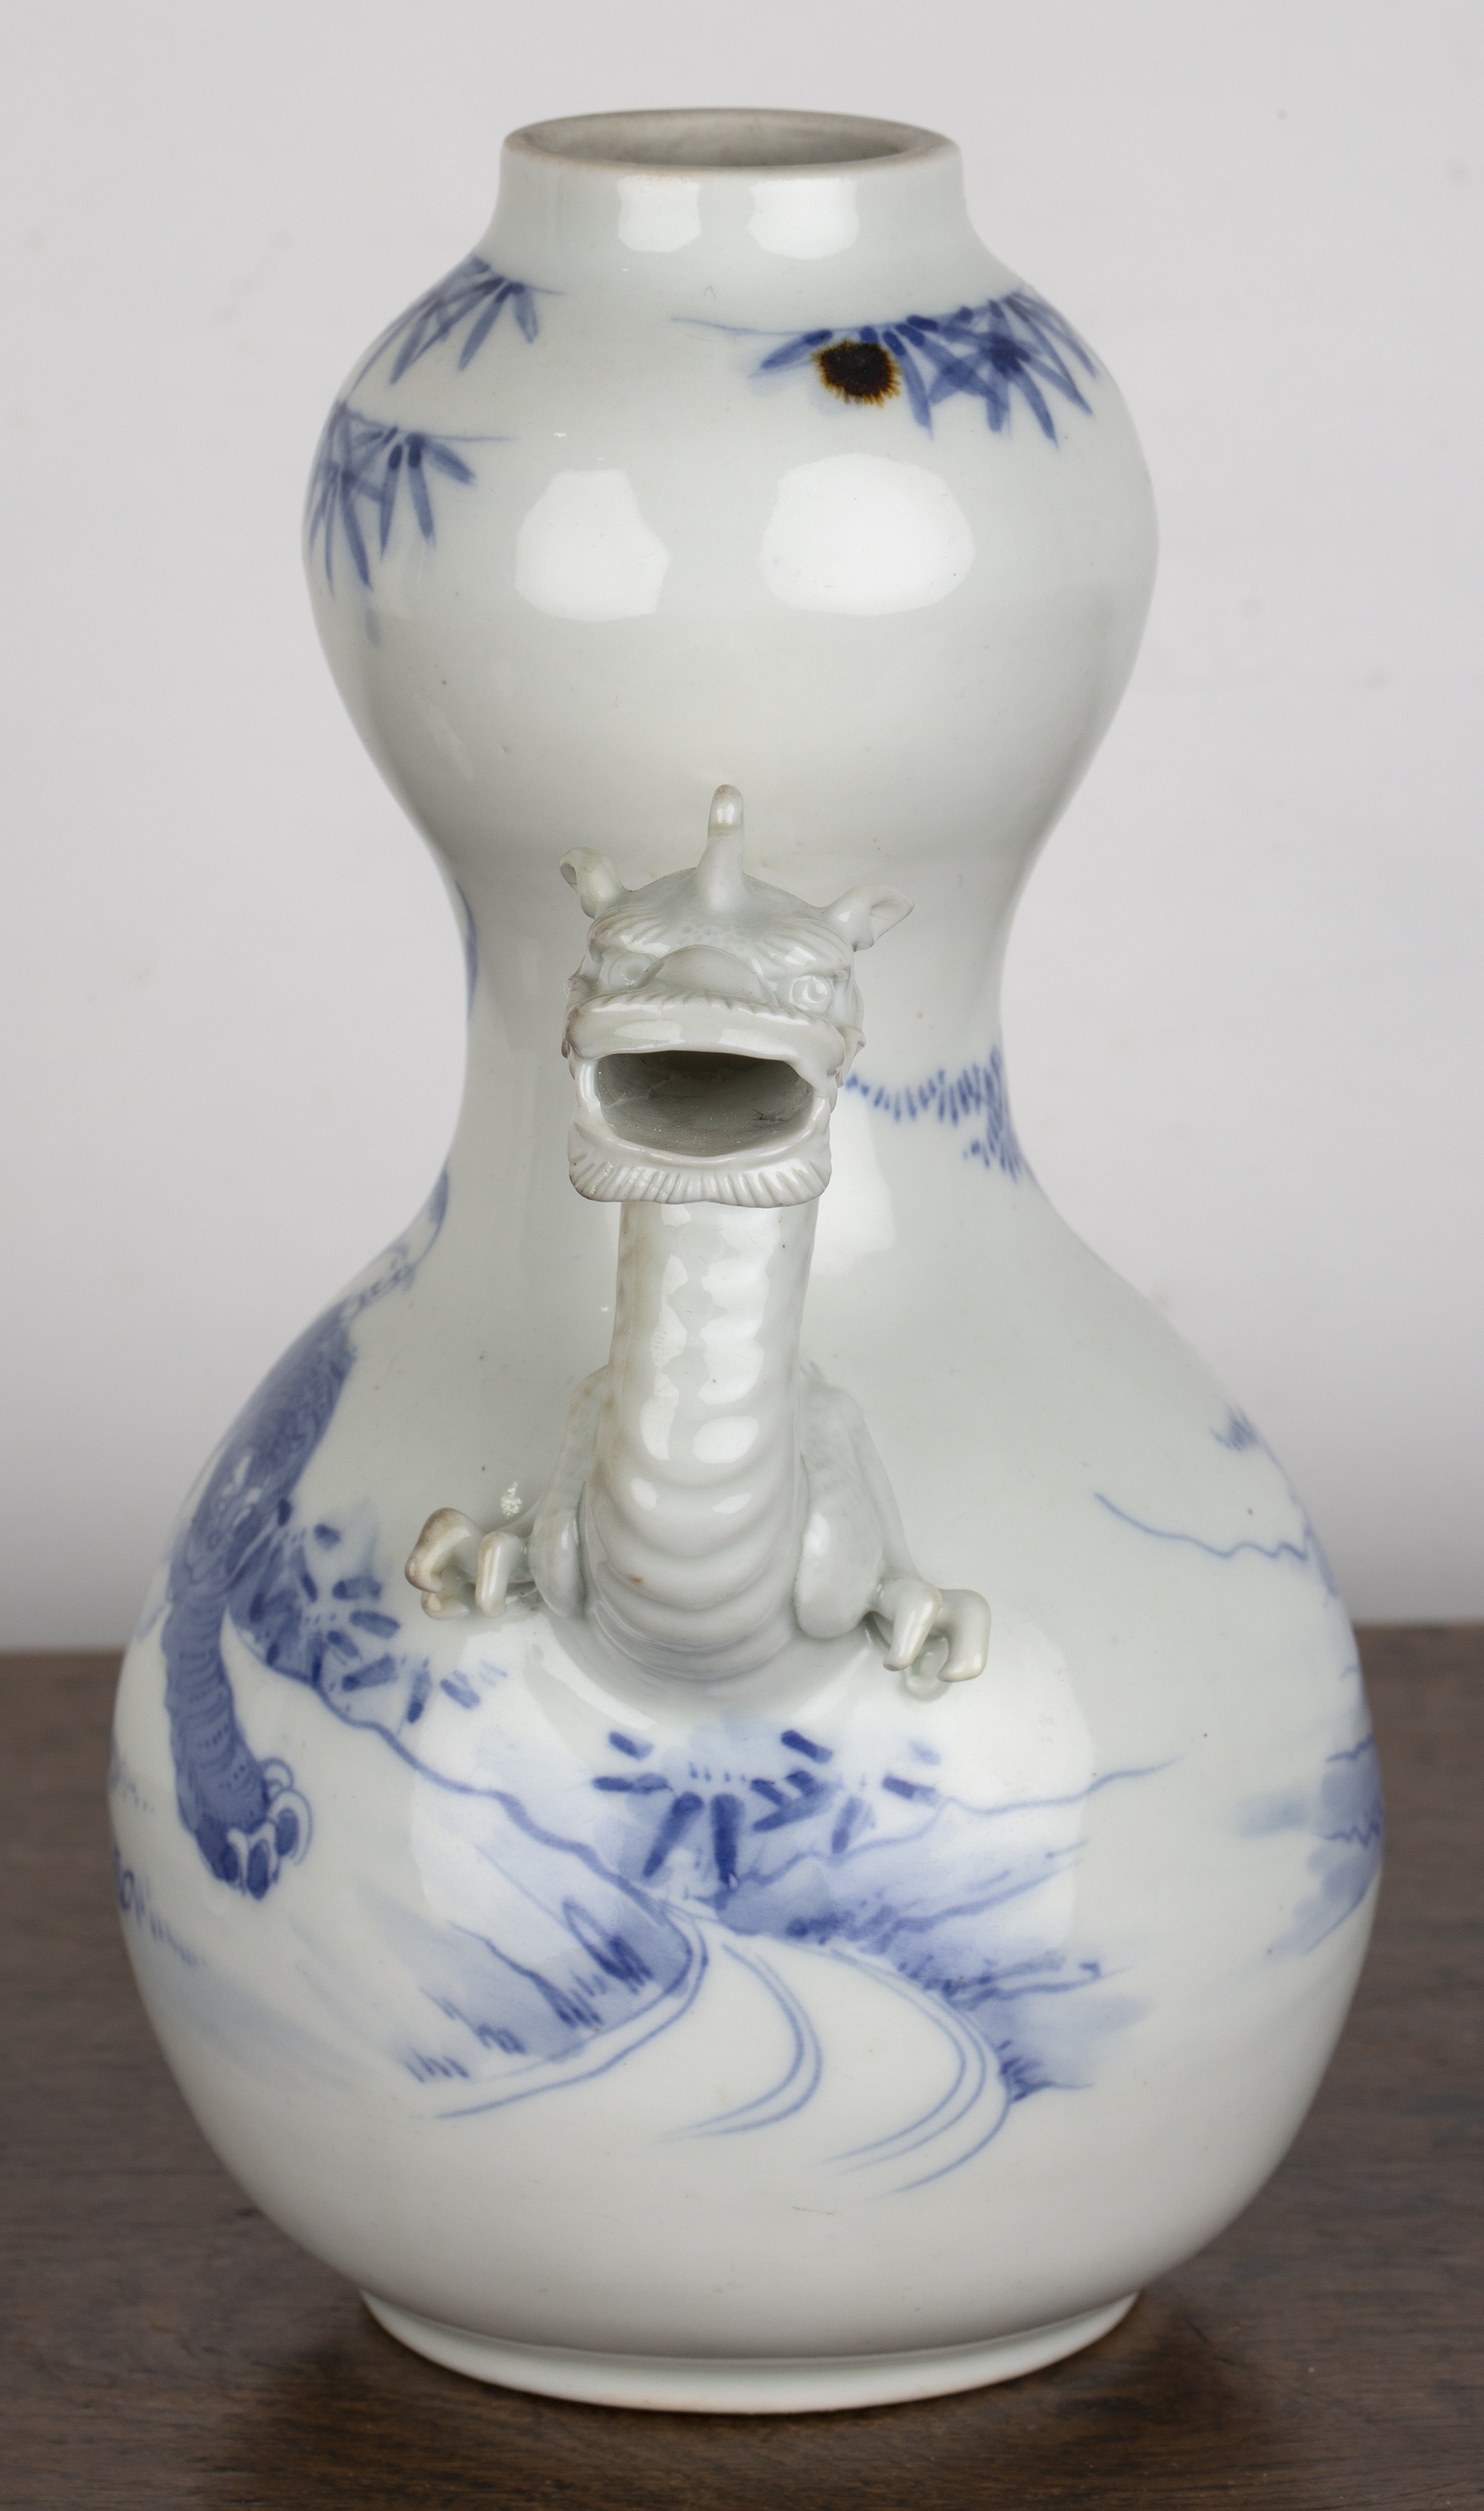 Blue and white porcelain double gourd teapot Japanese, 19th Century with a dragon handle and - Image 4 of 4